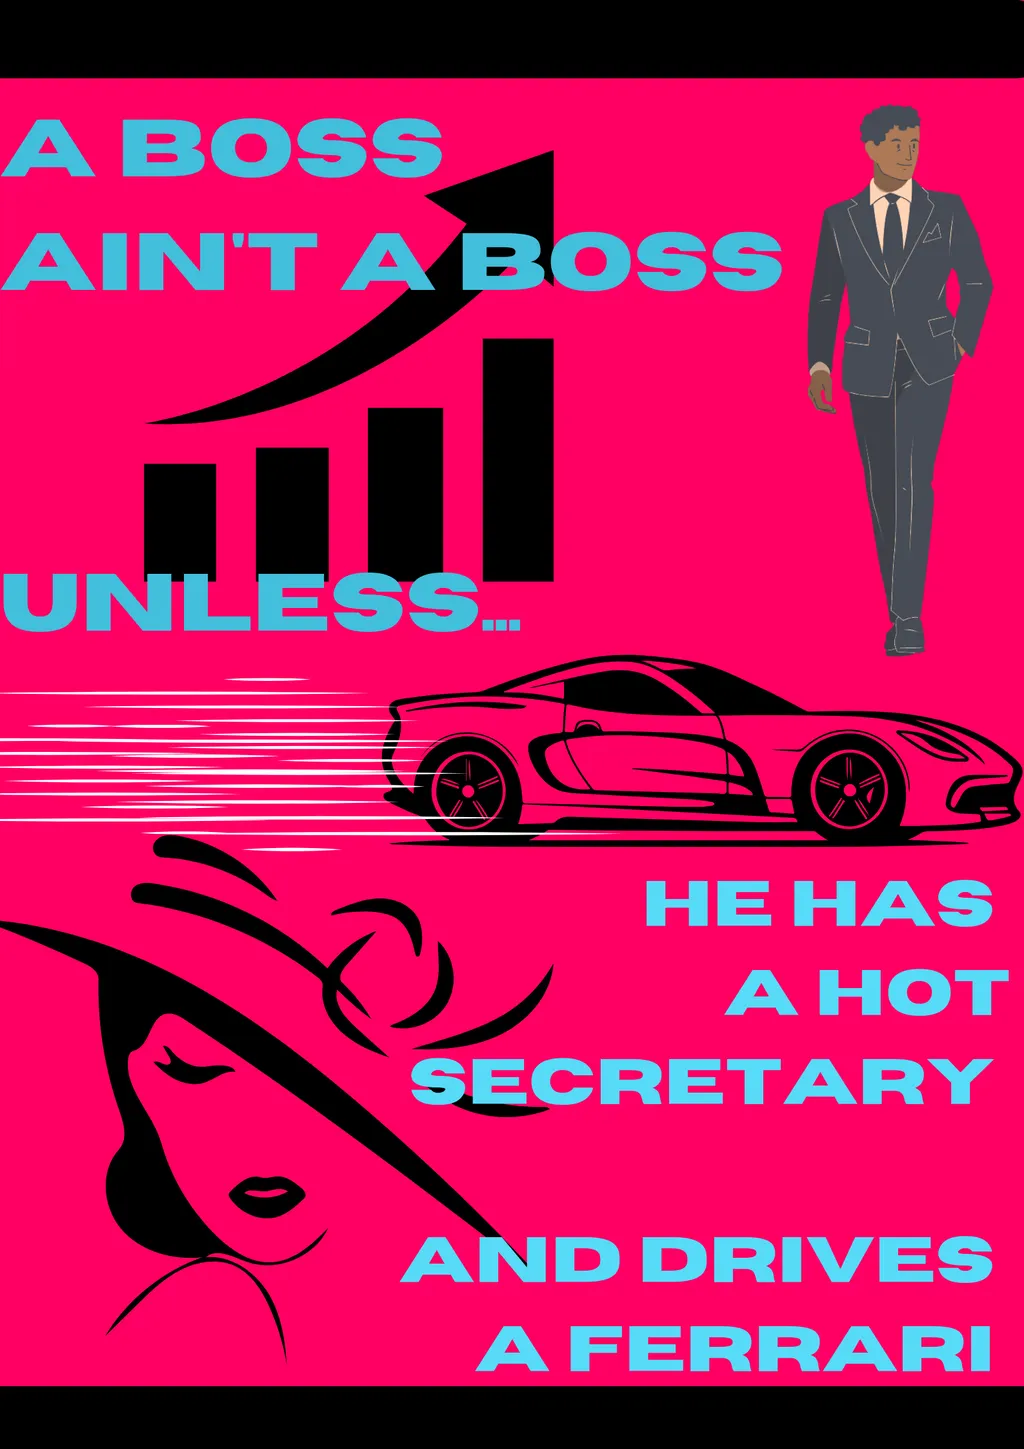 A Dose of Wittezism: A Boss (bow)